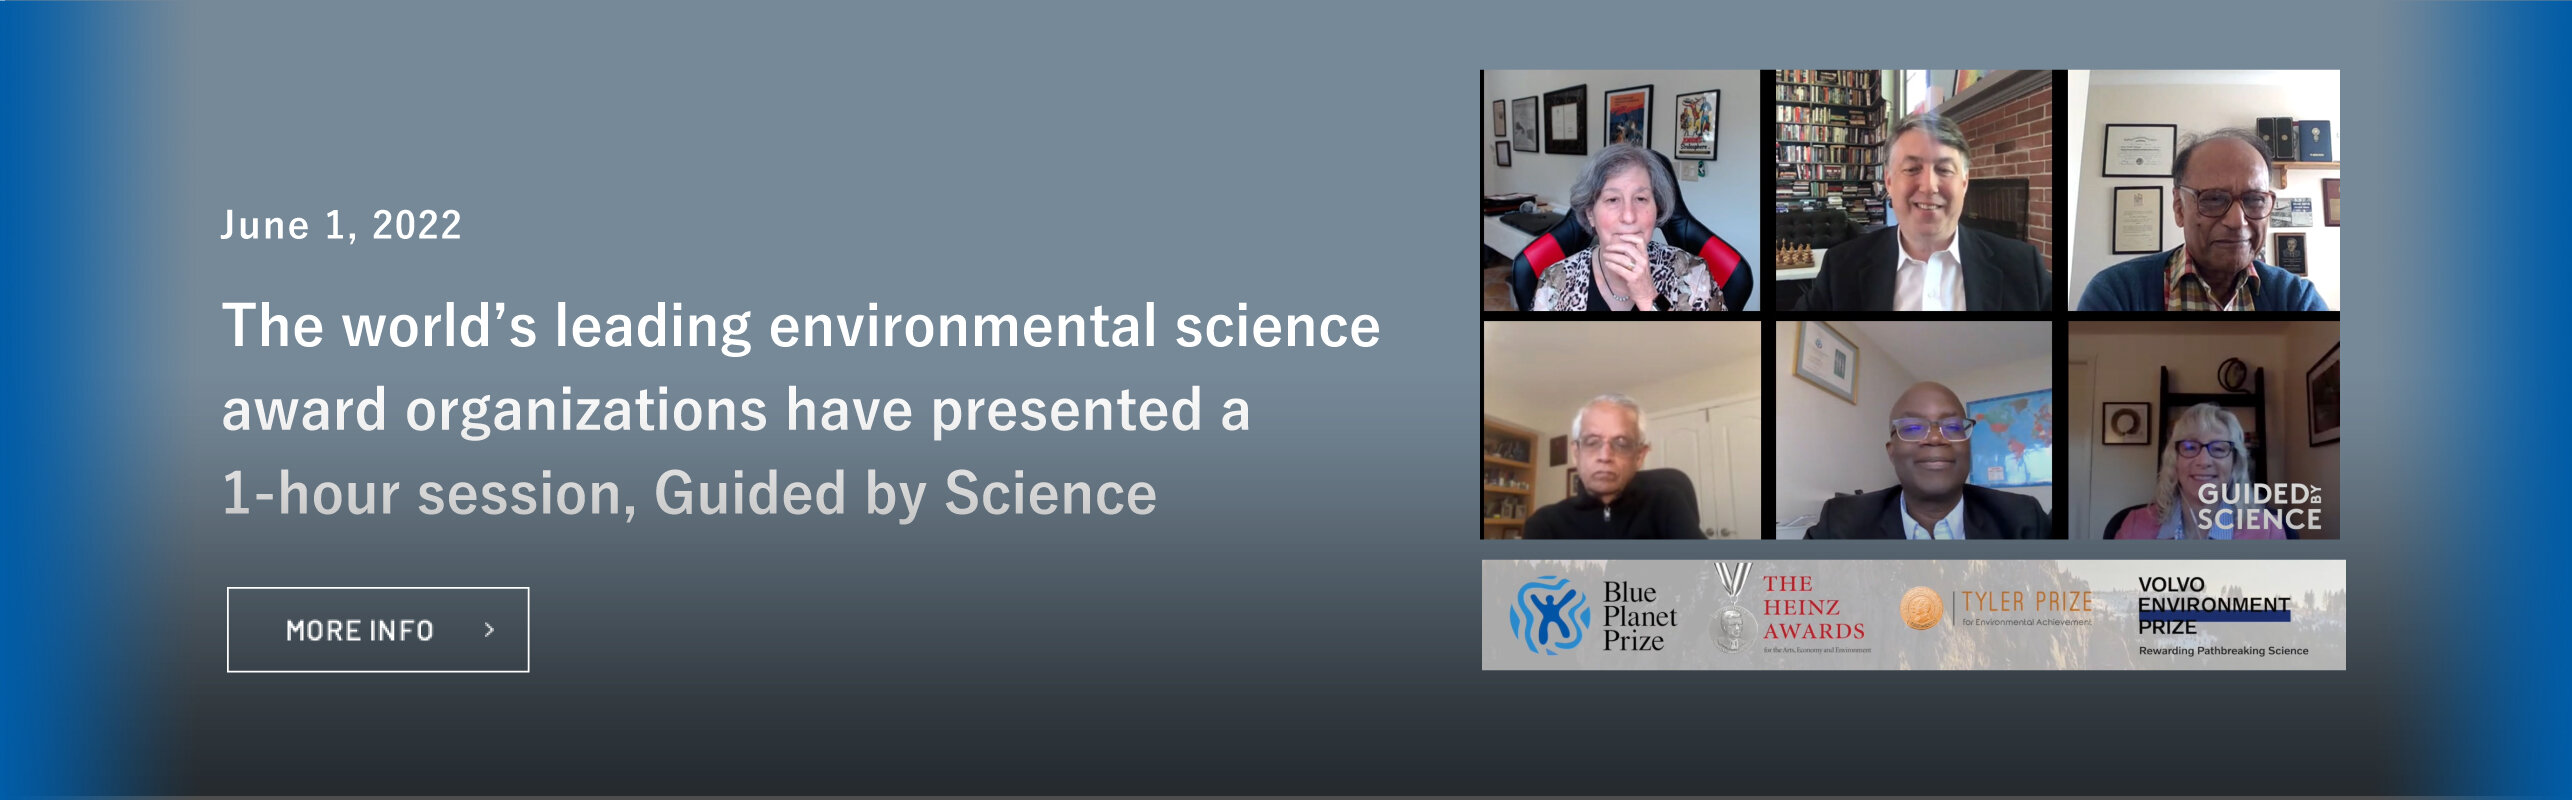 The world's leading environmental  science award organizations have  presented a session, Guided by Science